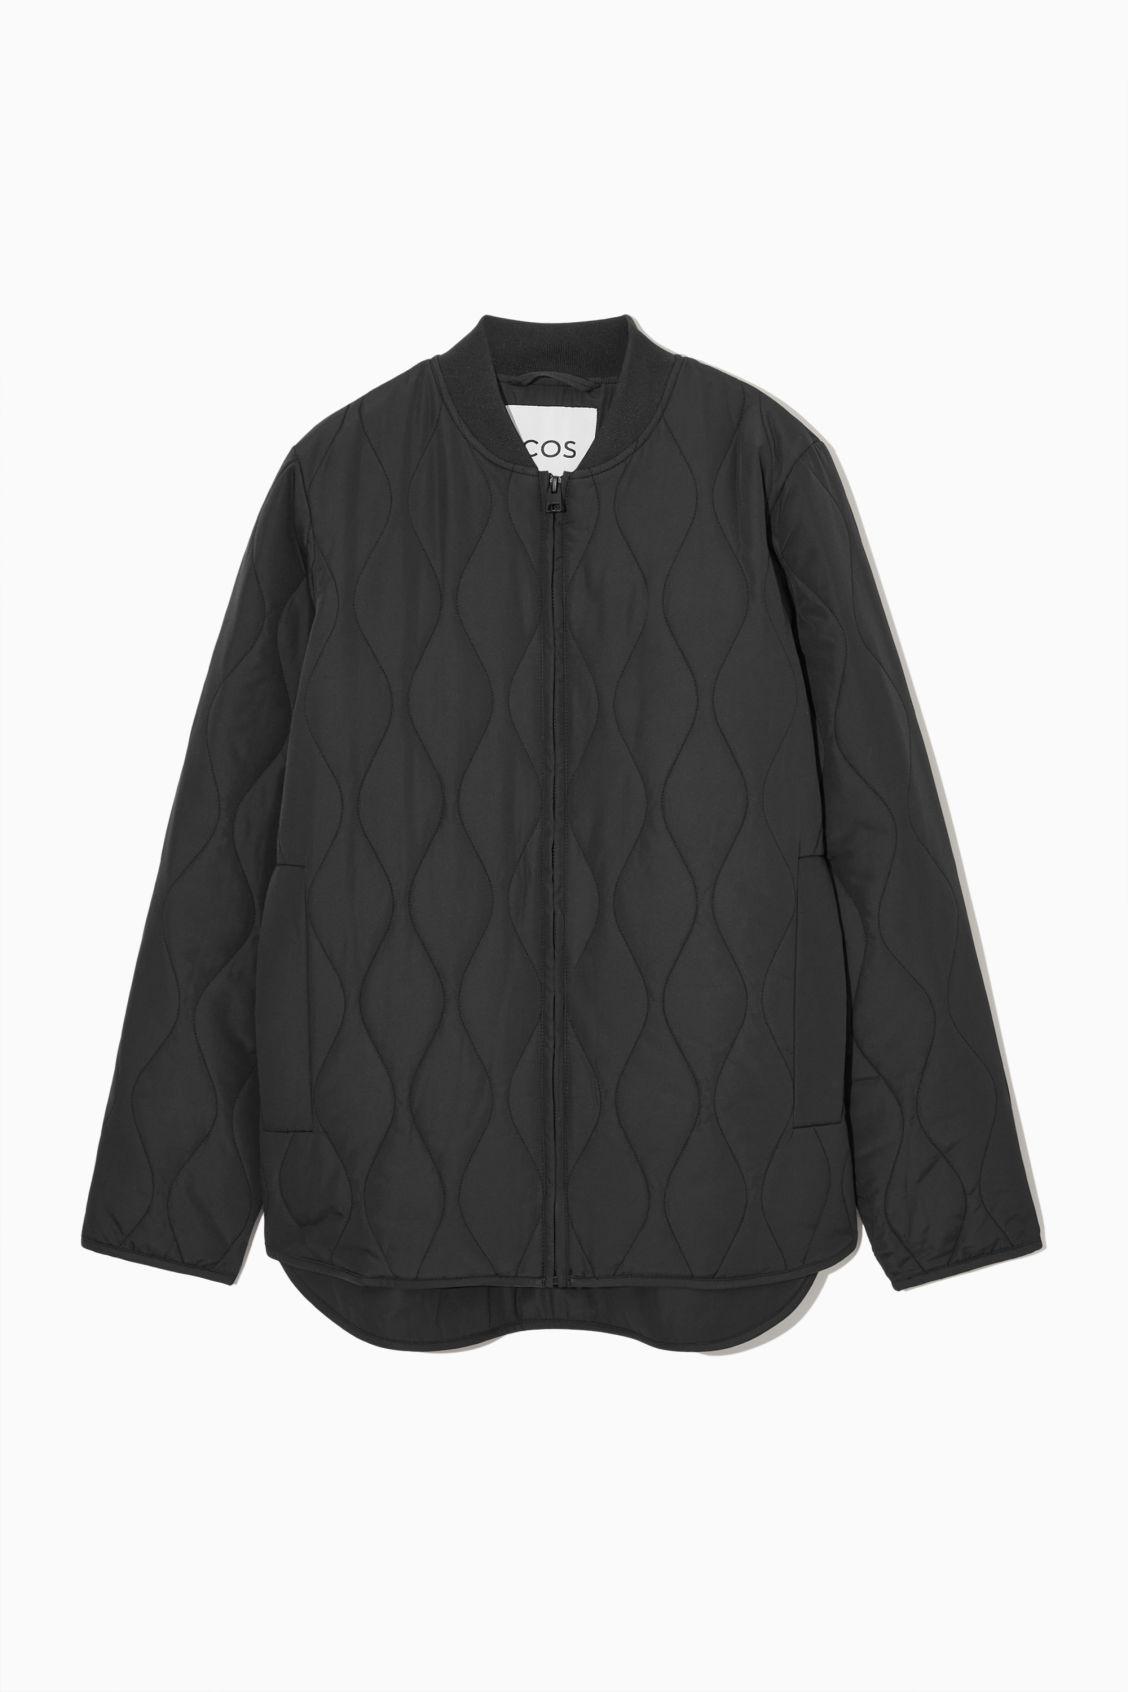 COS Synthetic Quilted Liner Jacket in Black | Lyst